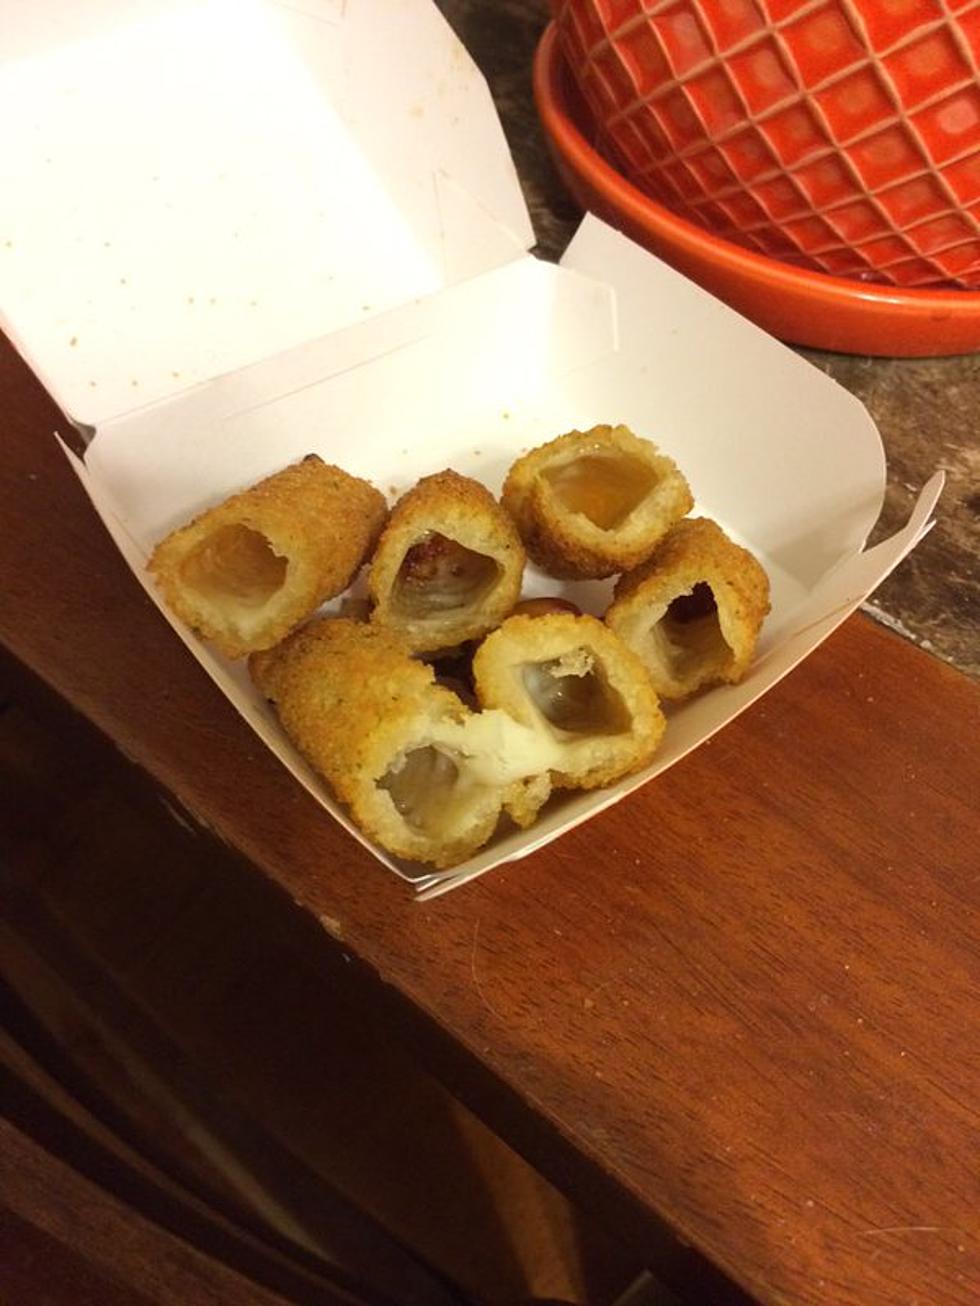 Are Your McDonald’s Cheese Sticks Missing the Cheese?